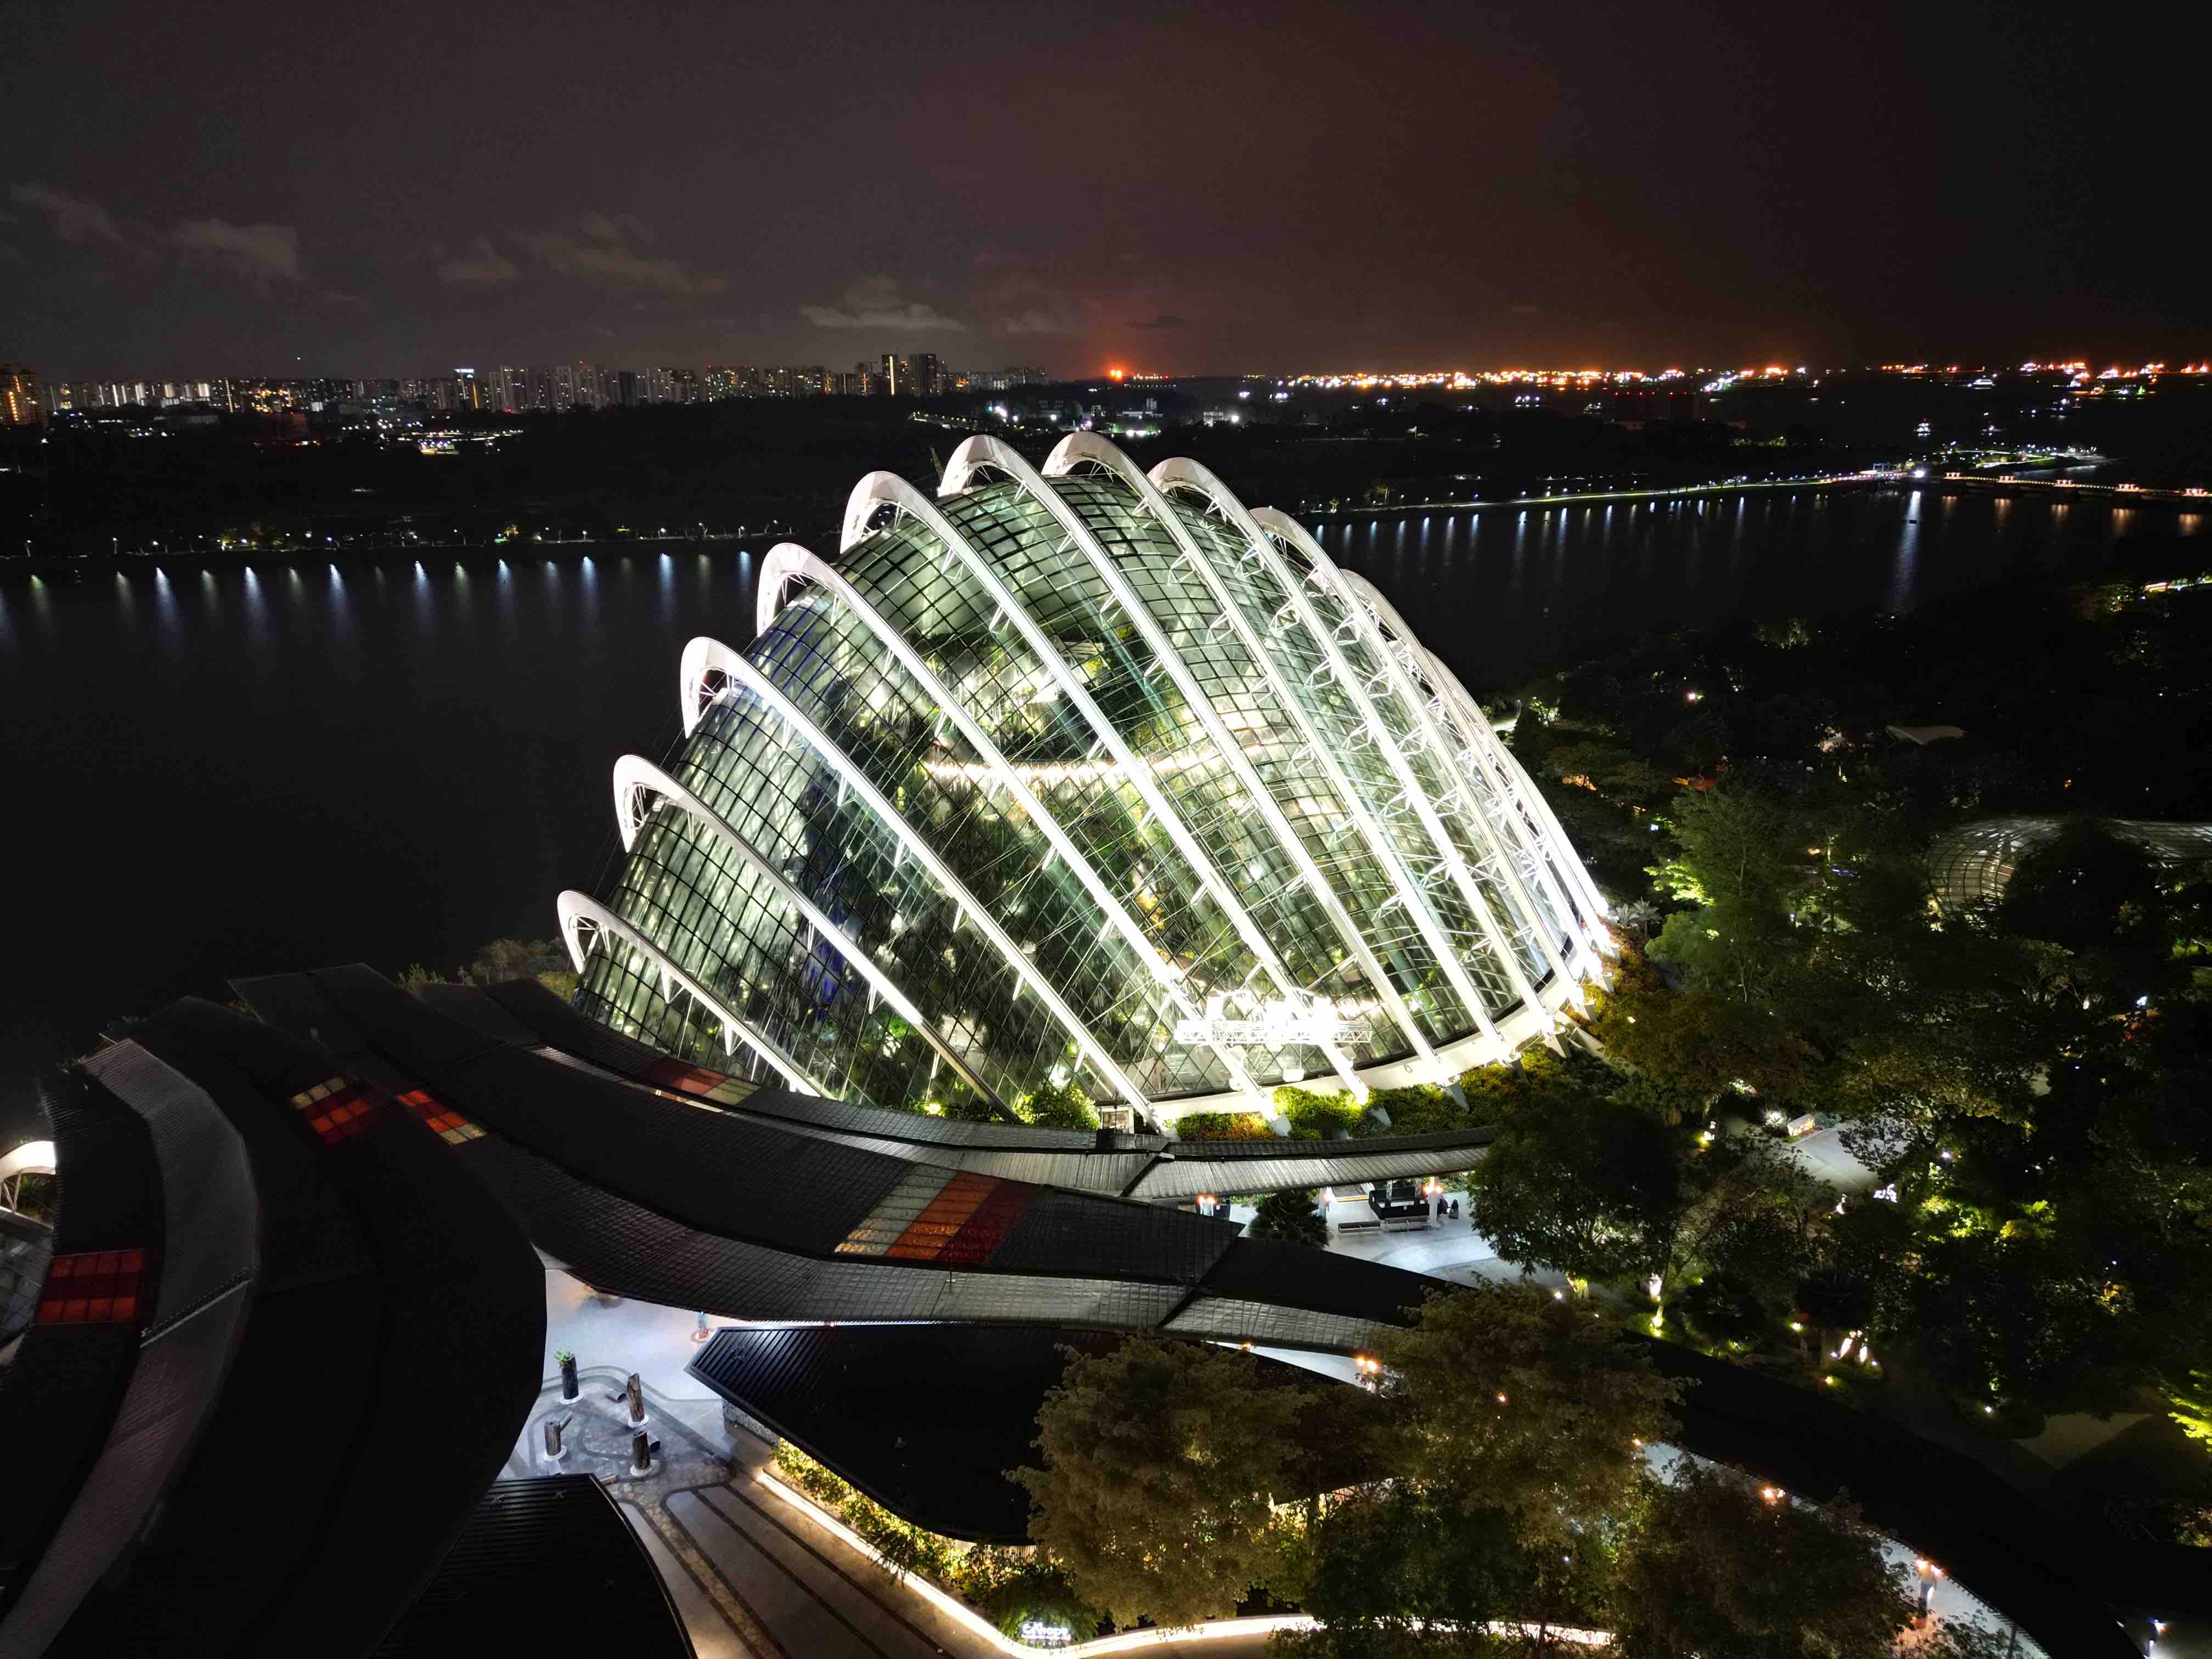 Ayrtons Domino LT light up the Gardens on the Bay Conservatories during the Singapore Airlines Singapore Grand Prix F1 ni